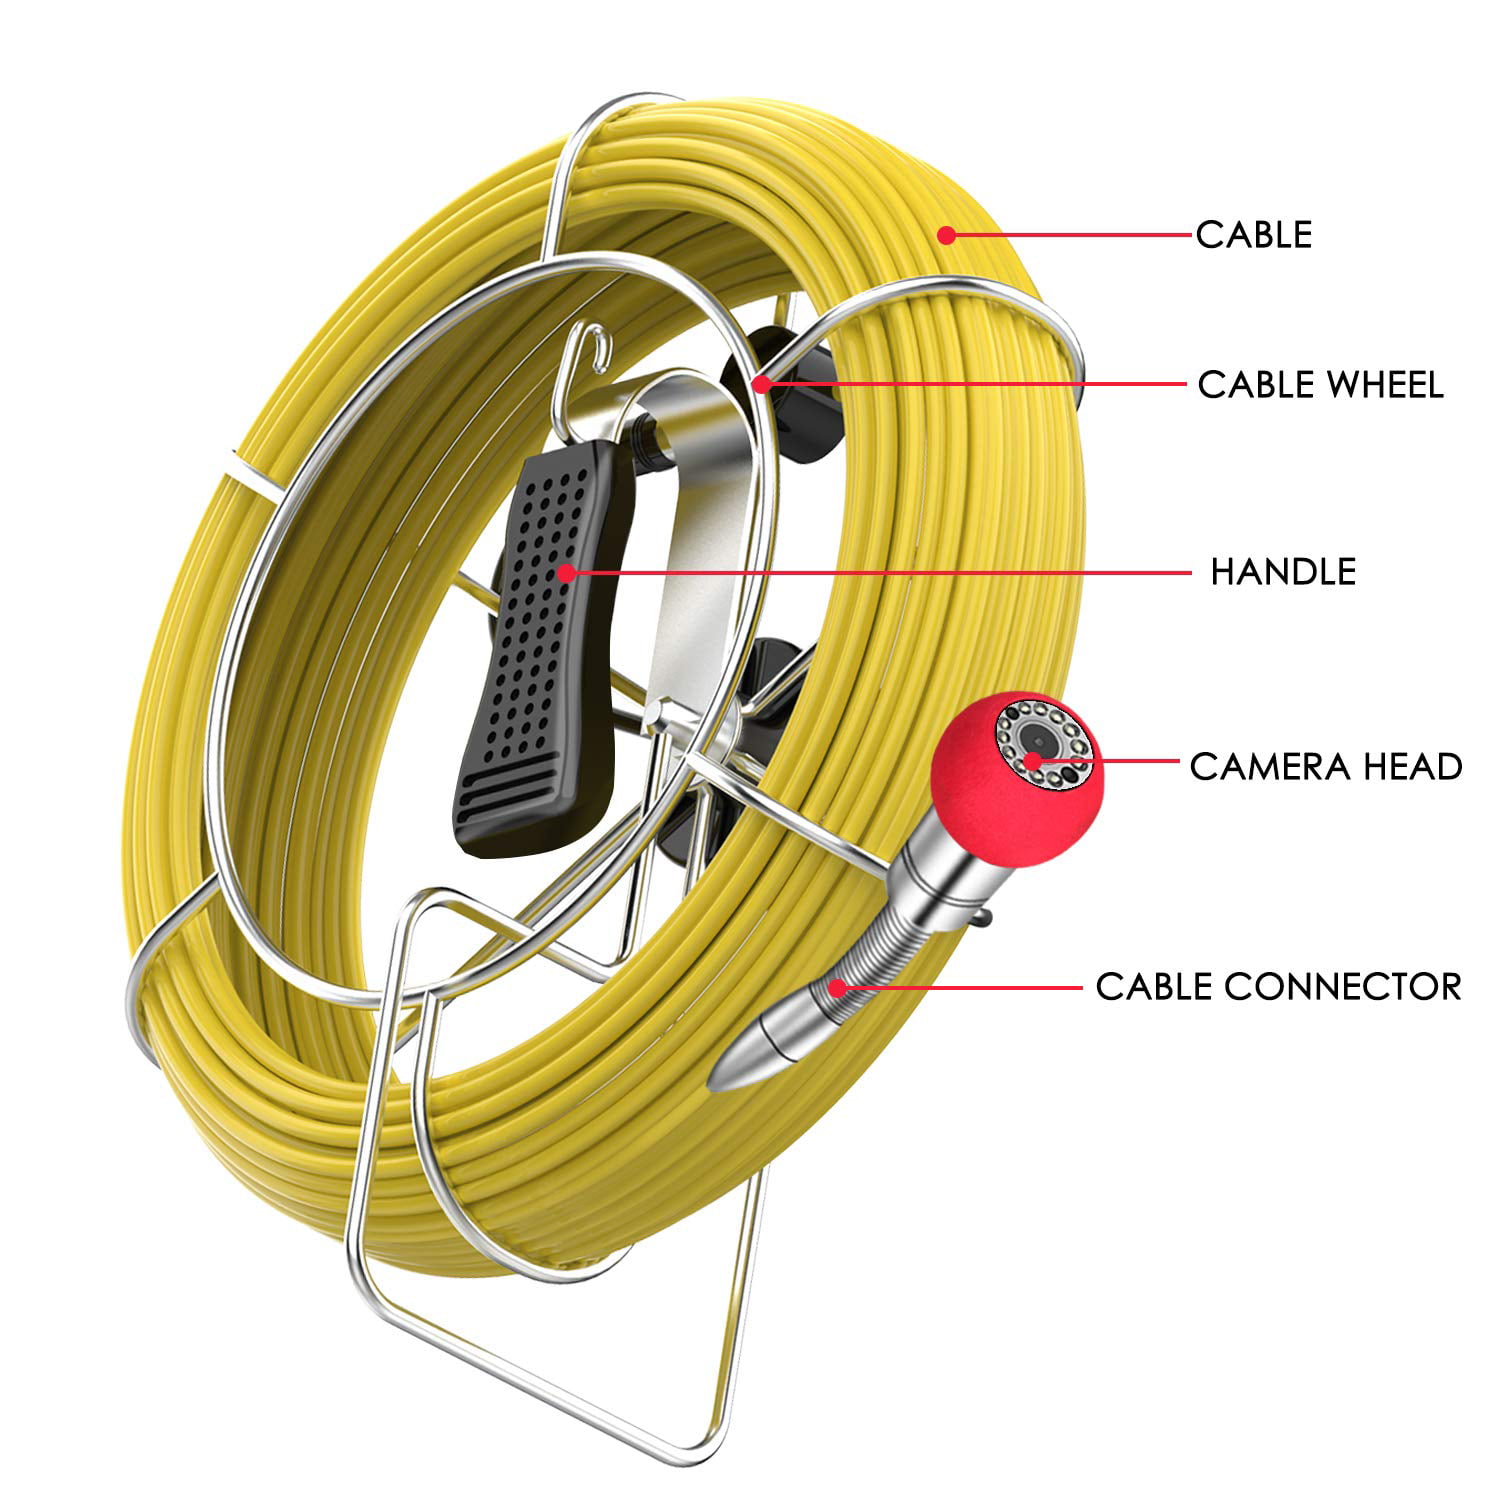 50M-with DVR Pipe Camera,IHBUDS Sewer Camera 50M/165ft Cable Pipe Inspection Camera with DVR Recorder Video System 7 Inch TFT LCD Monitor 1000TVL Sony CCD Plumbing Camera Industrial Endoscope